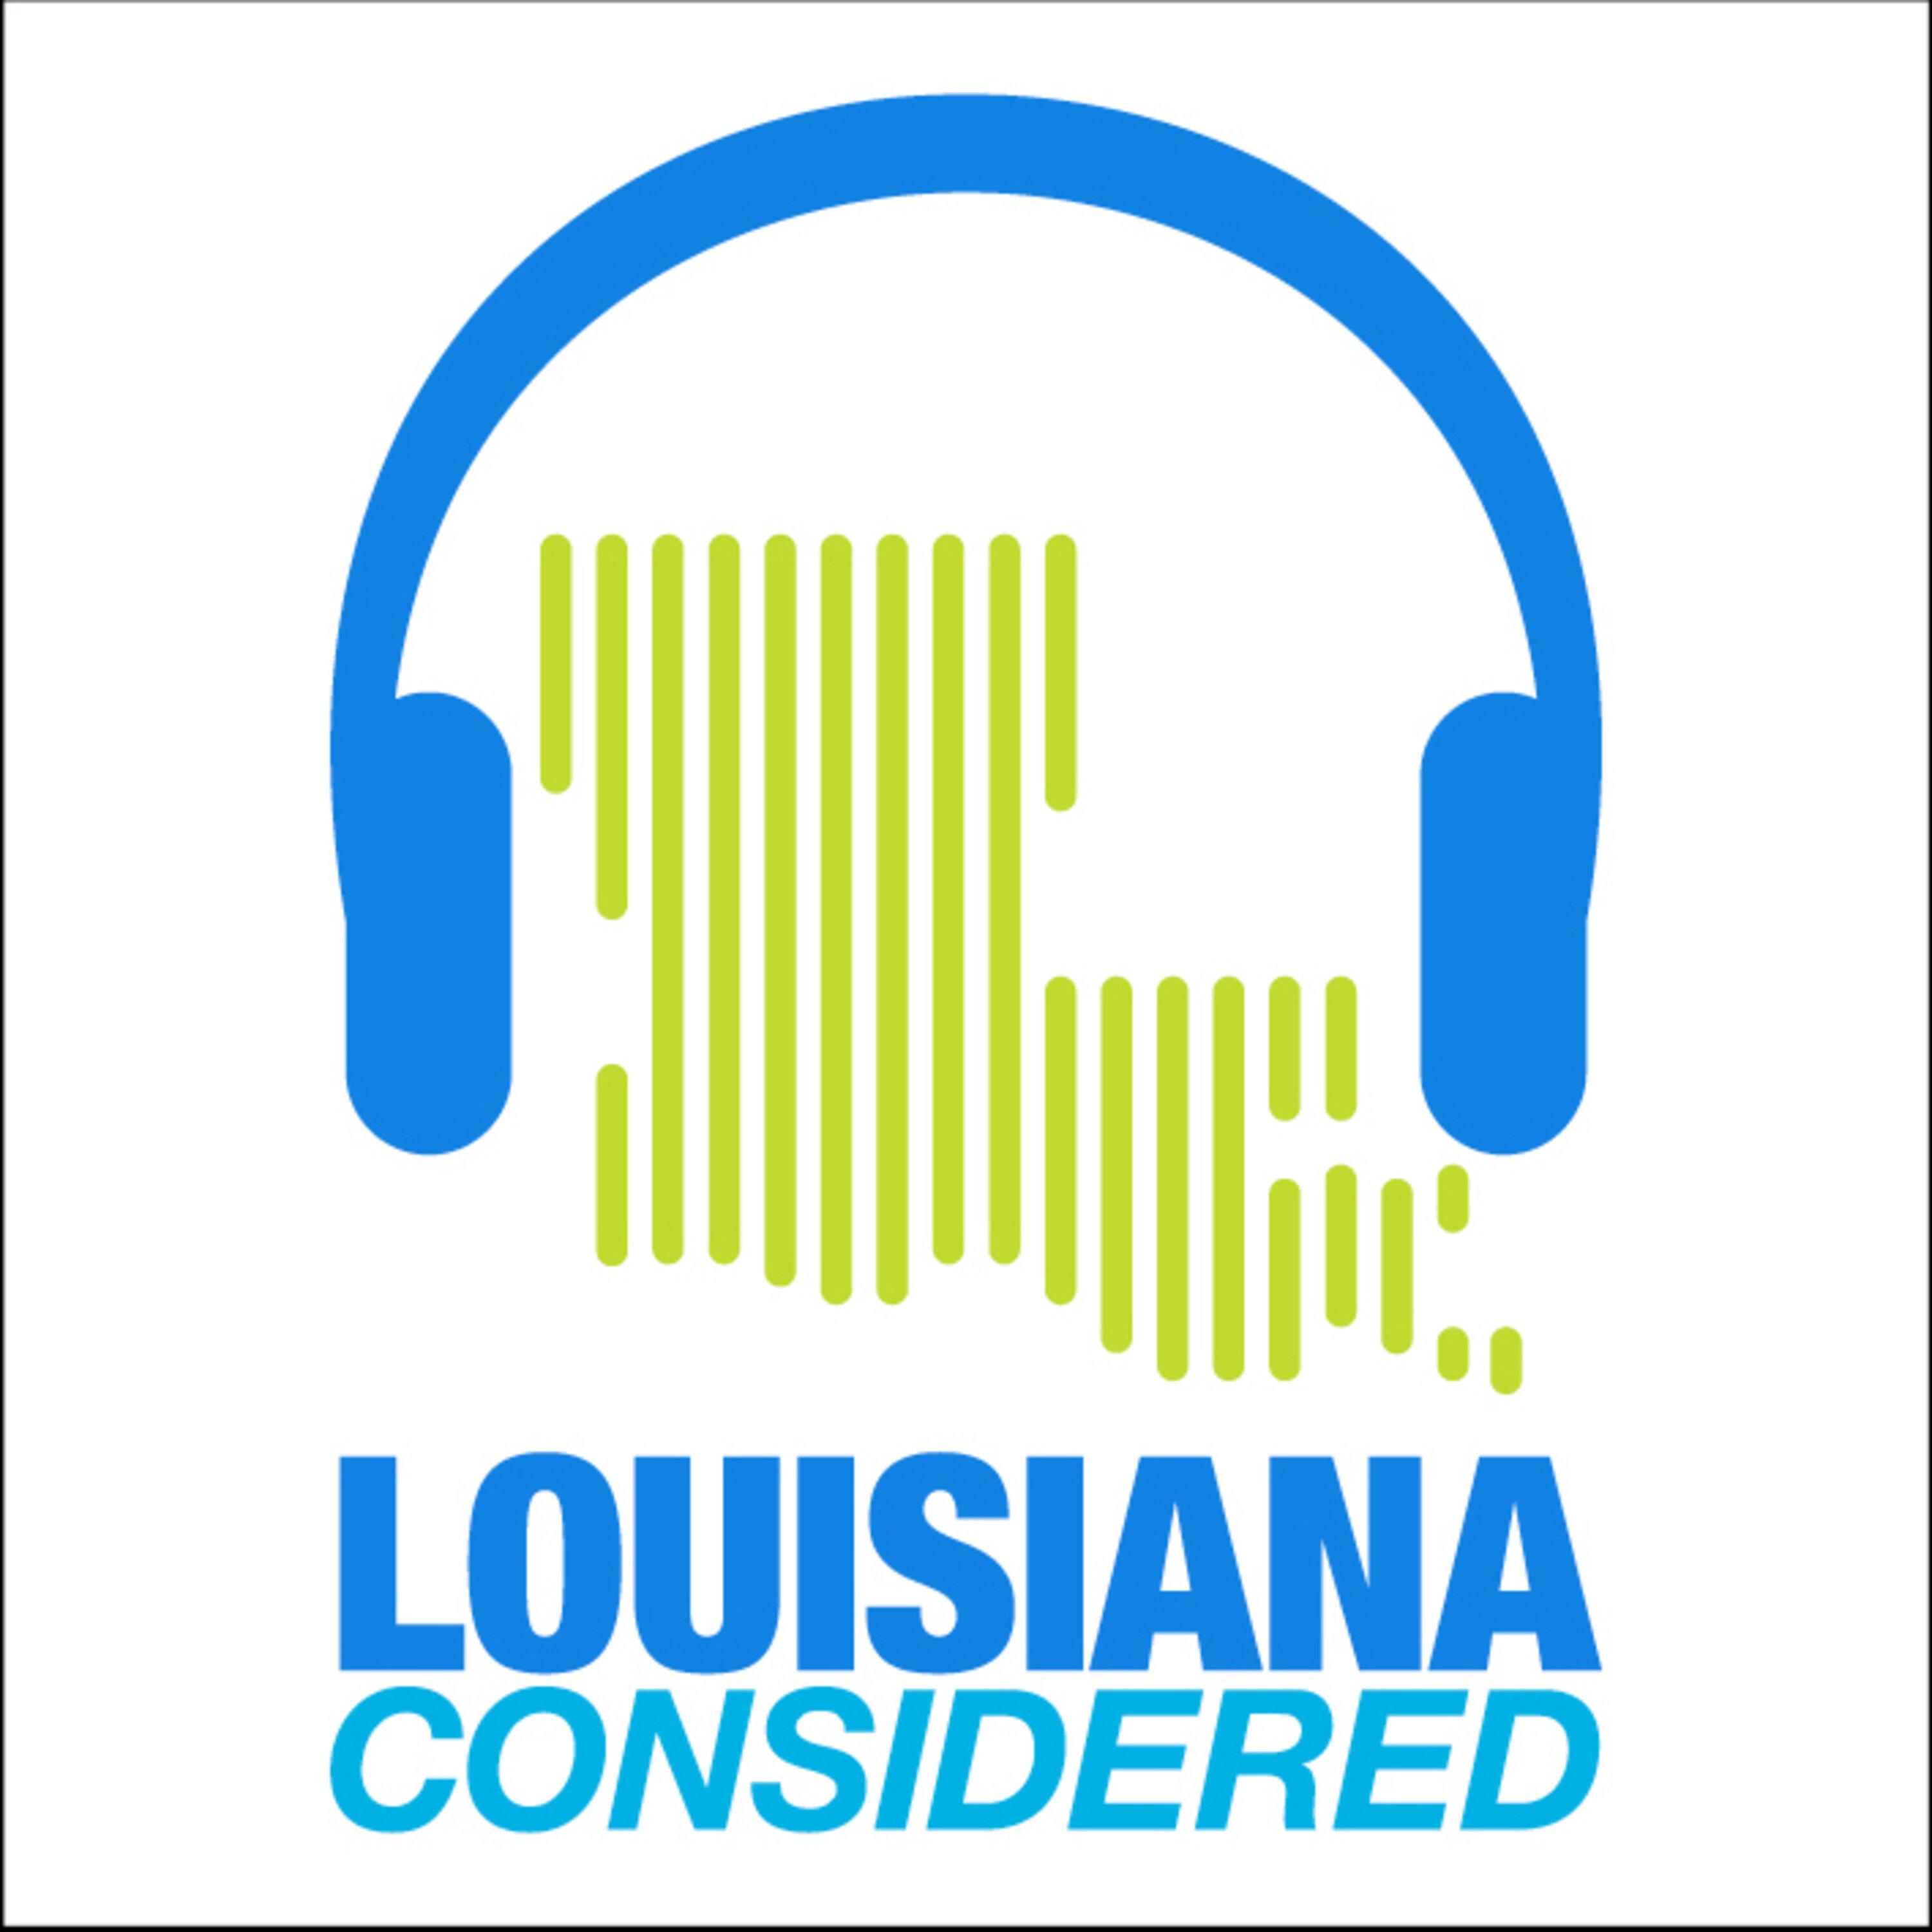 Thumbnail for "Louisiana Considered: Data Center Of Southeast Louisiana Begins Analysis Of U.S. Census Data, How The Delta Variant Affects Children".